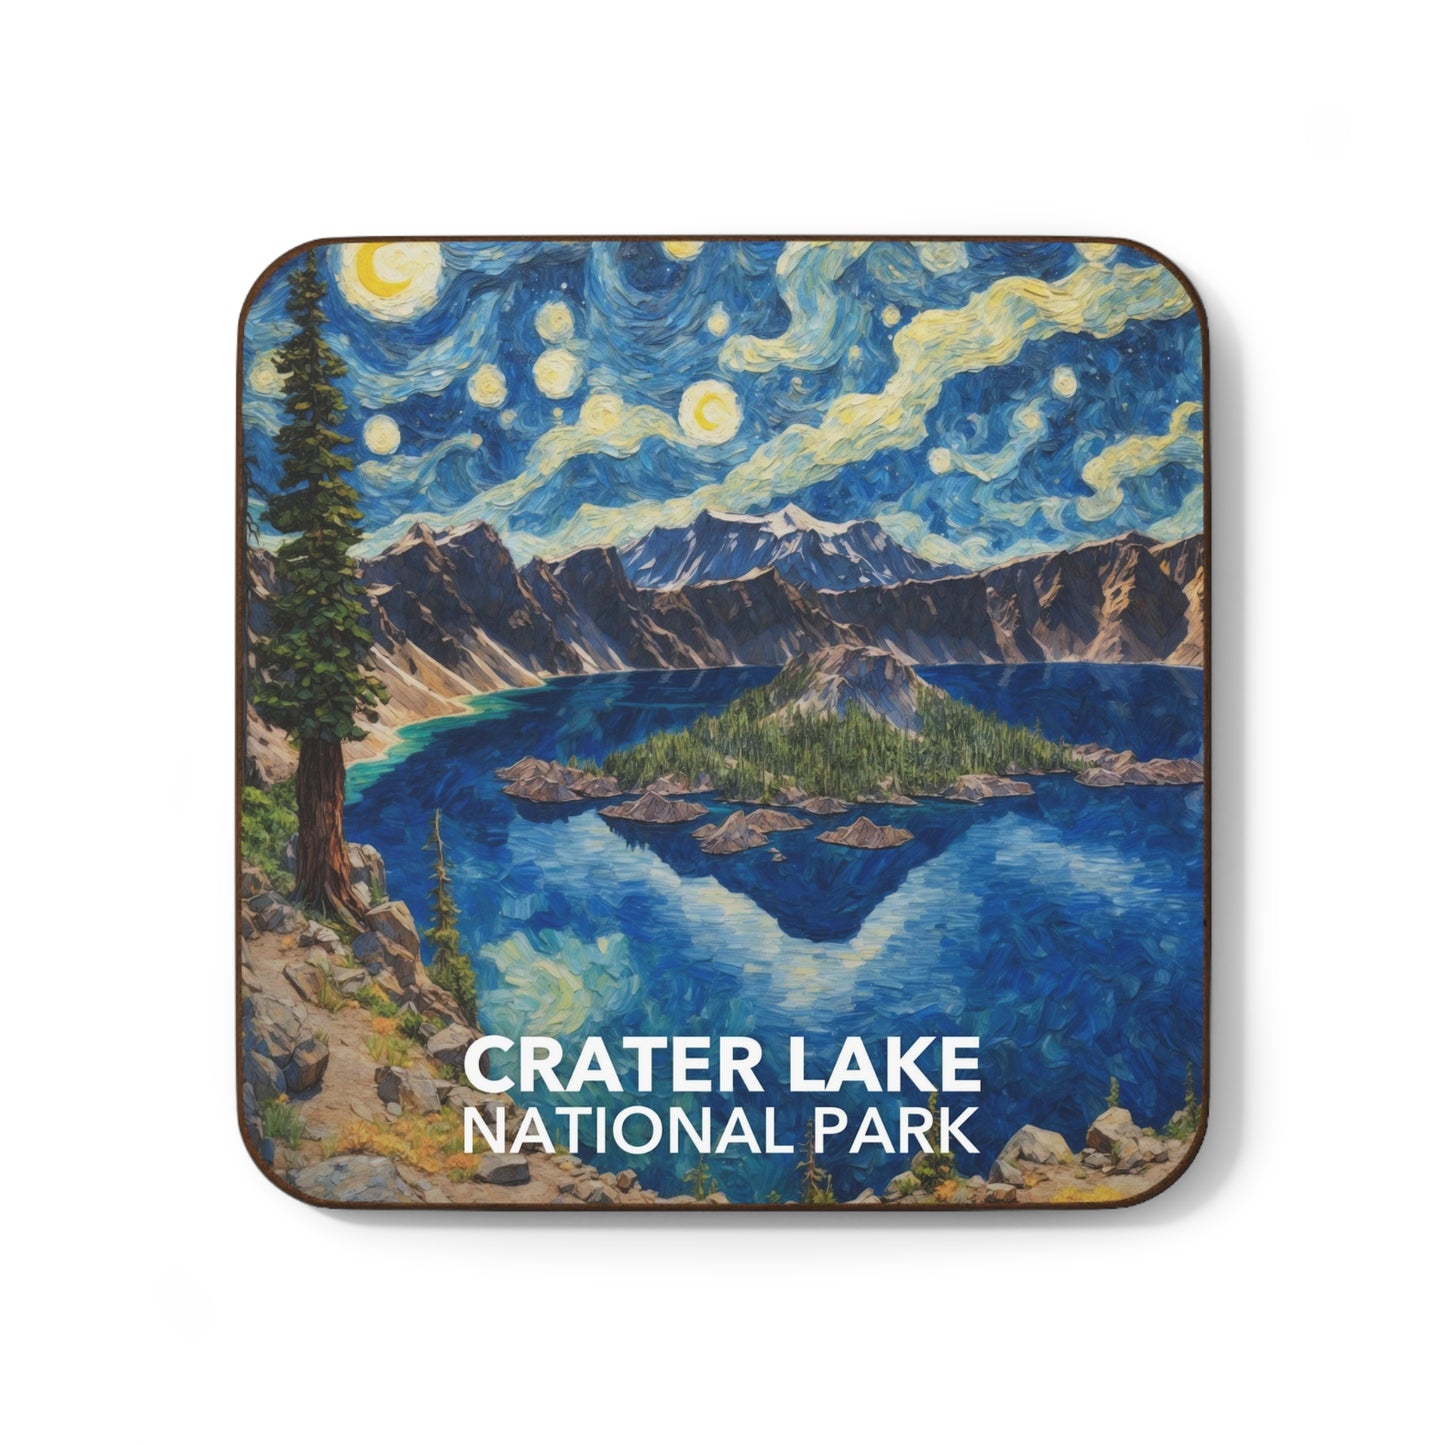 Crater Lake National Park Coaster - The Starry Night